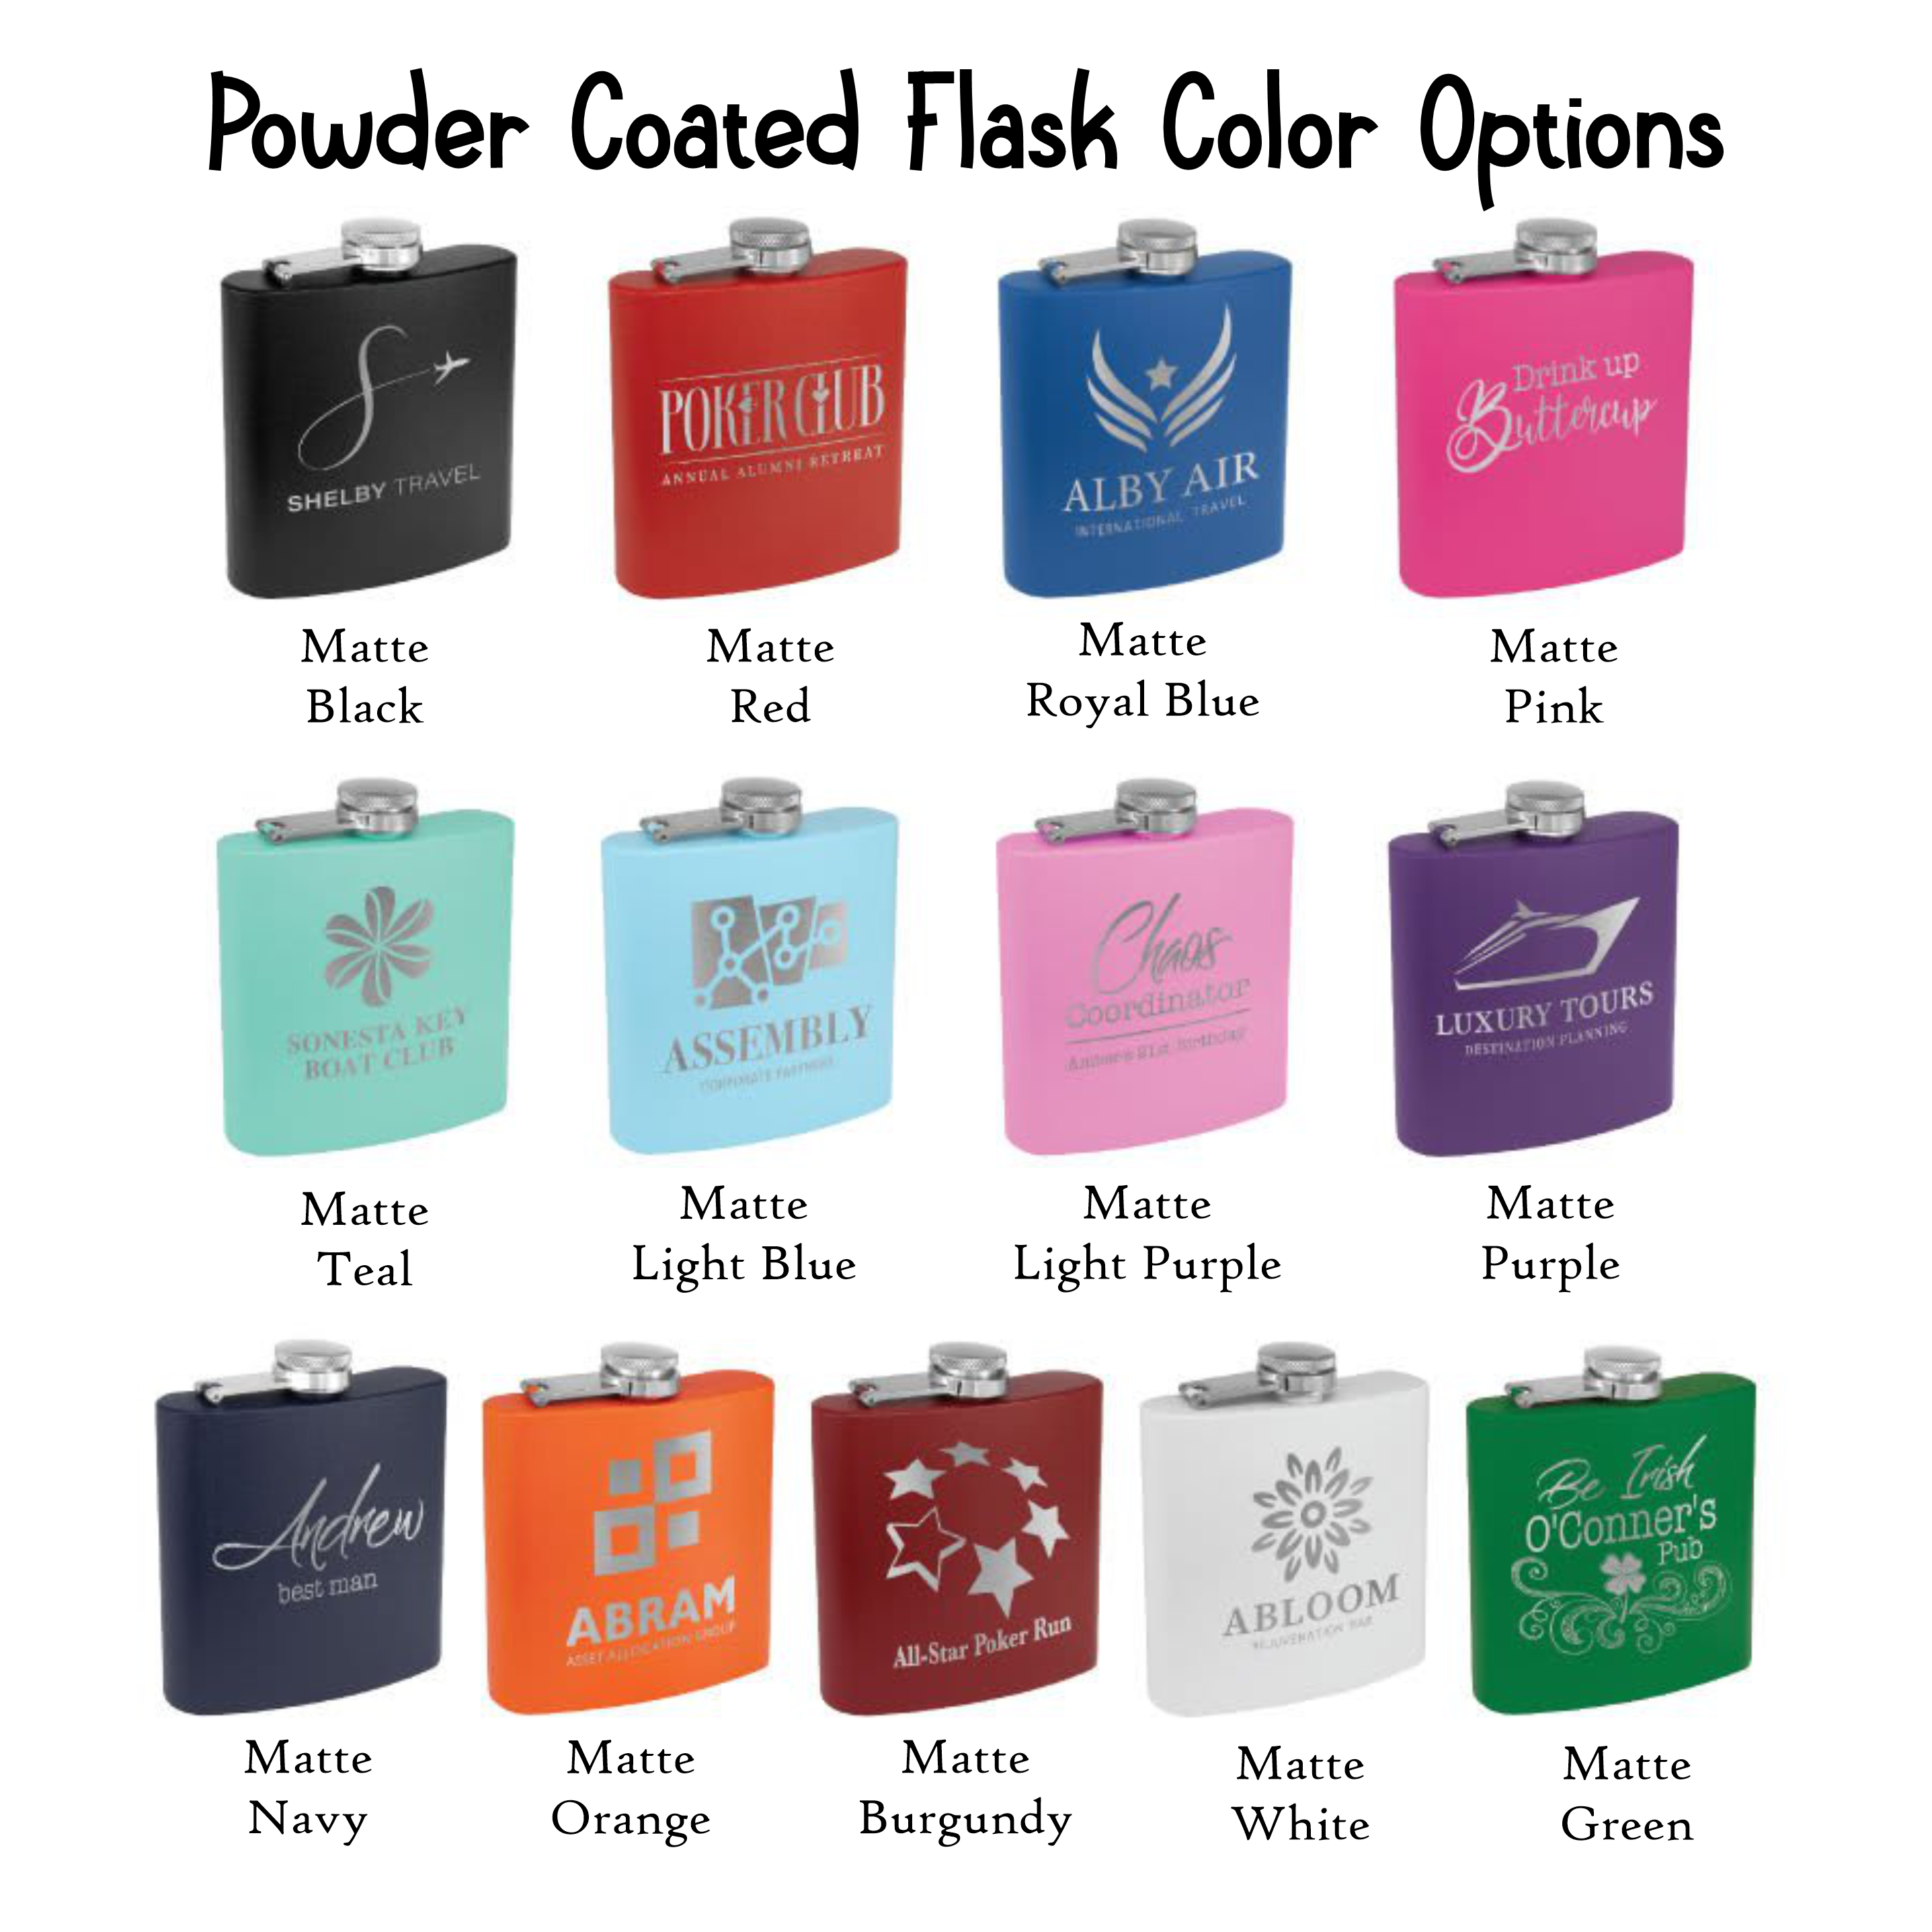 Most Popular Personalized Flask - Metal or Leatherette